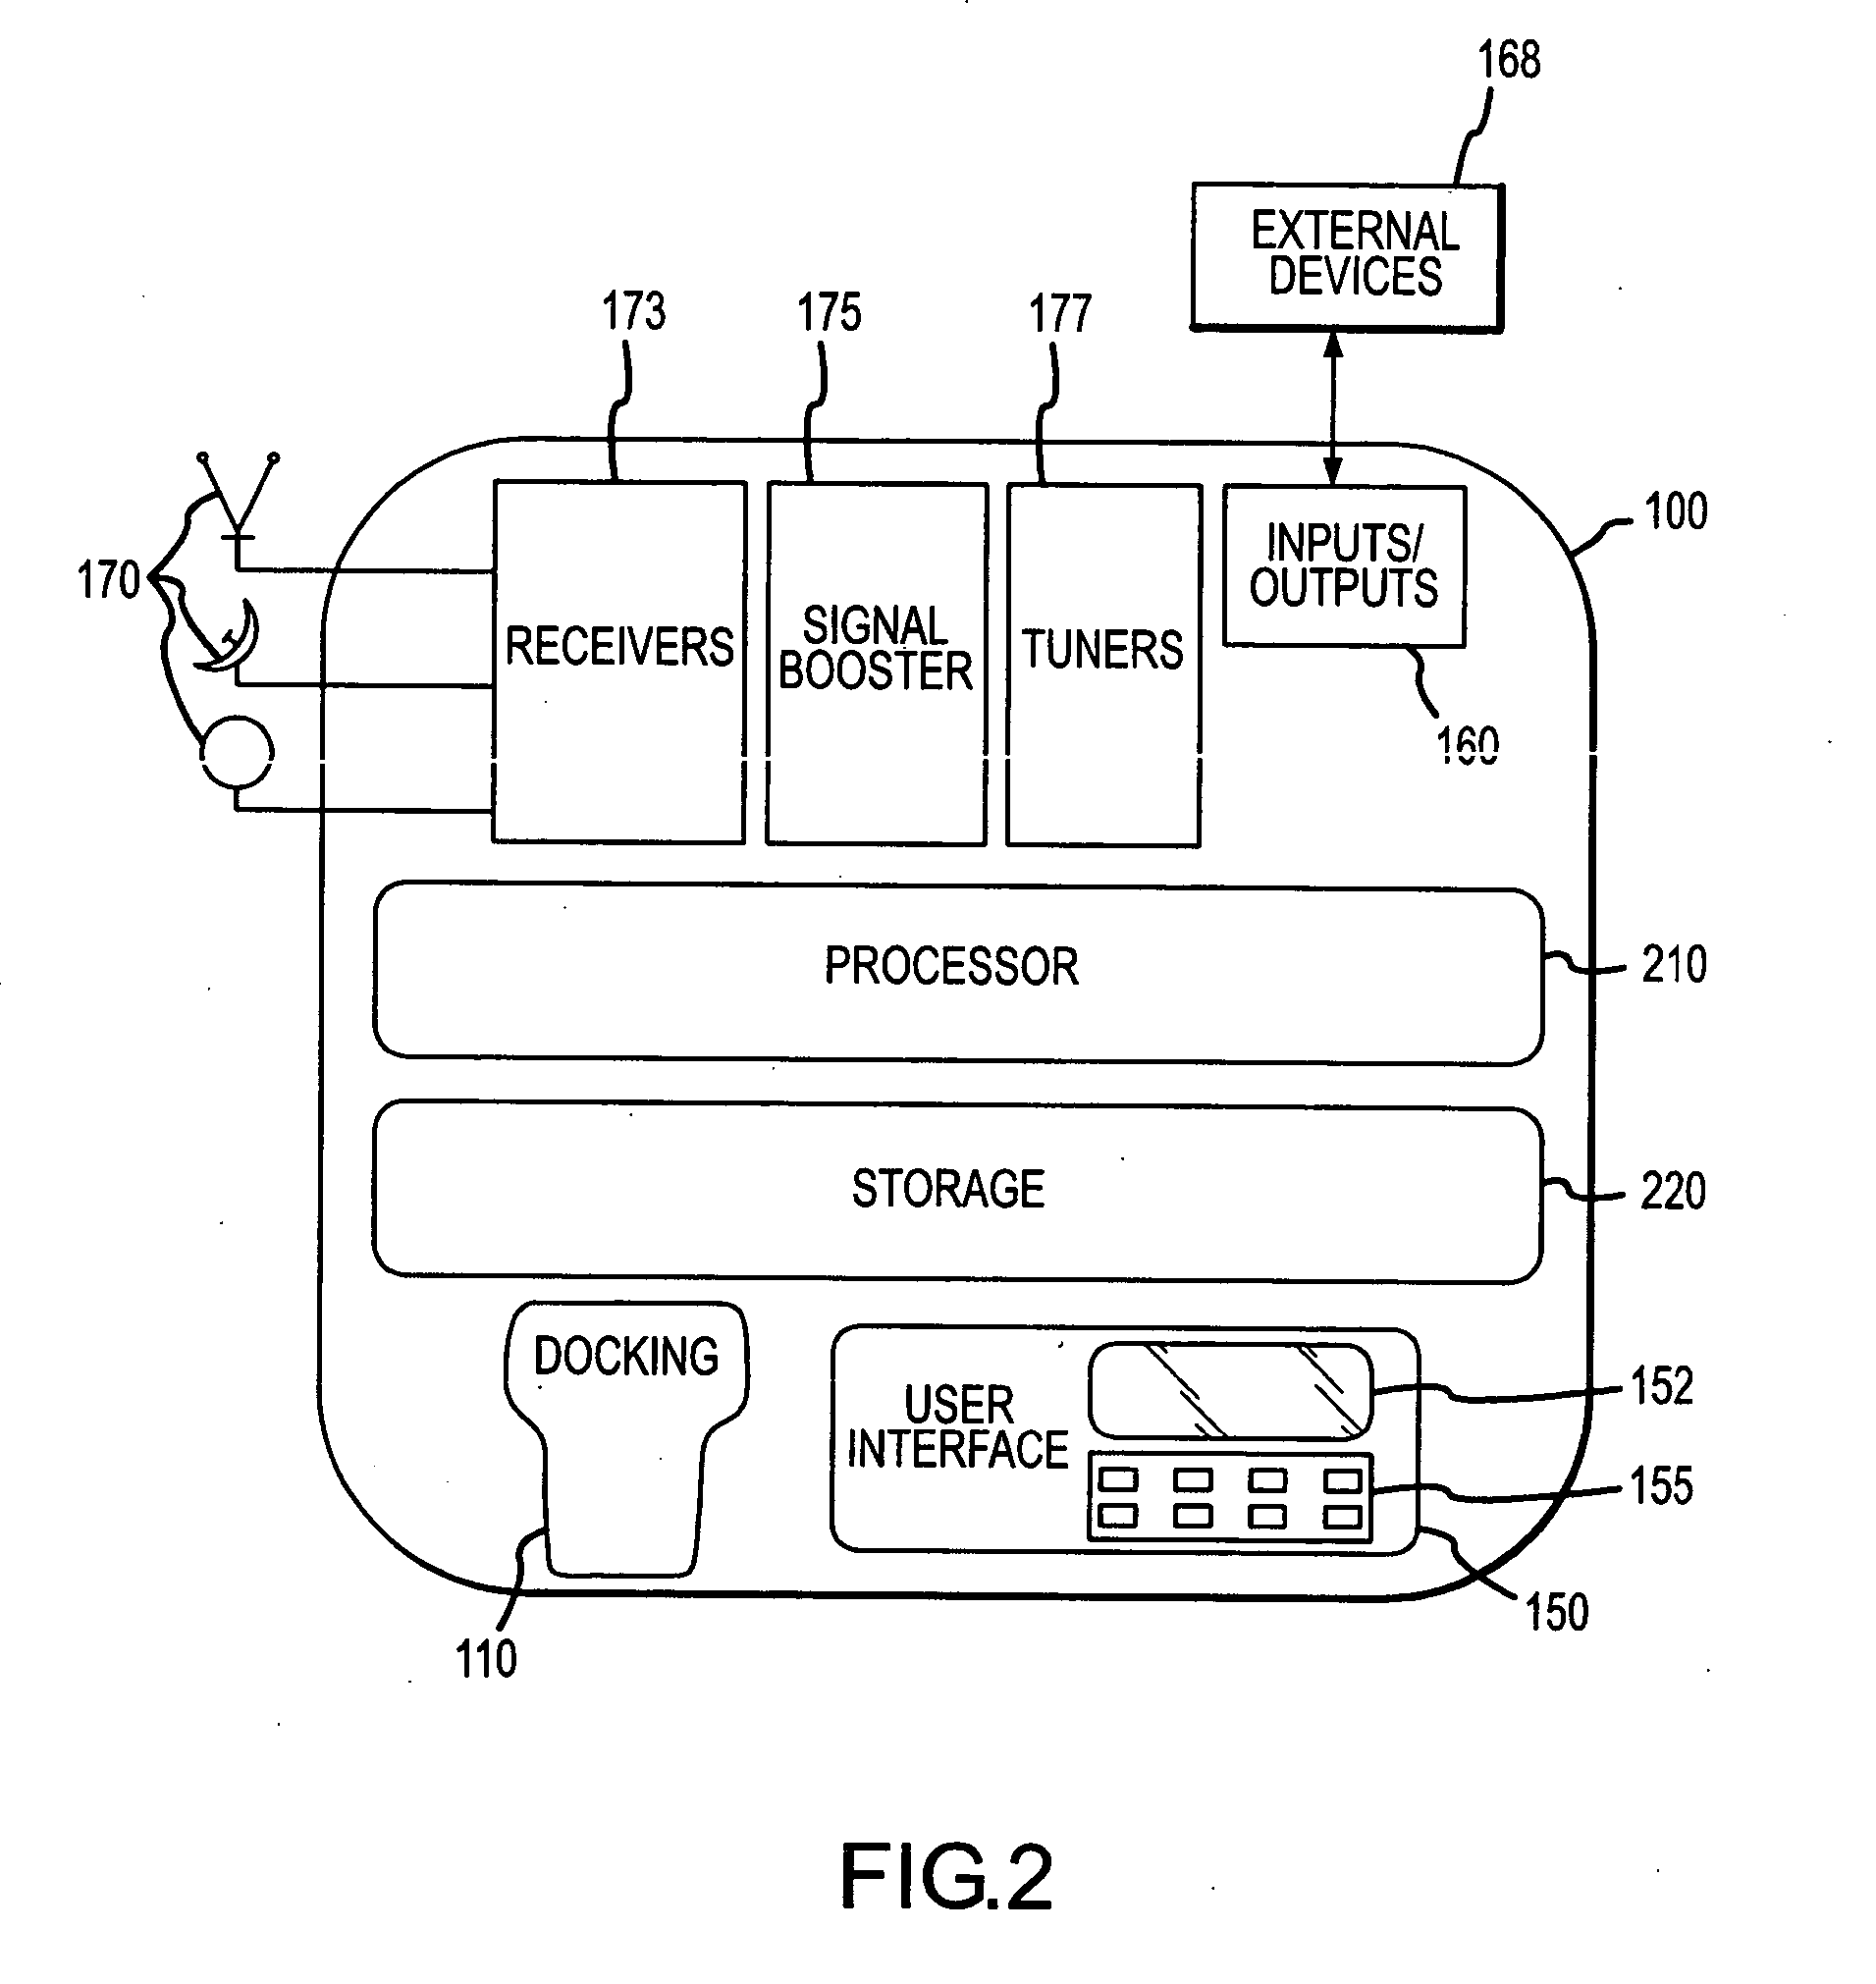 Mobile device base station for enhanced signal strength for media services